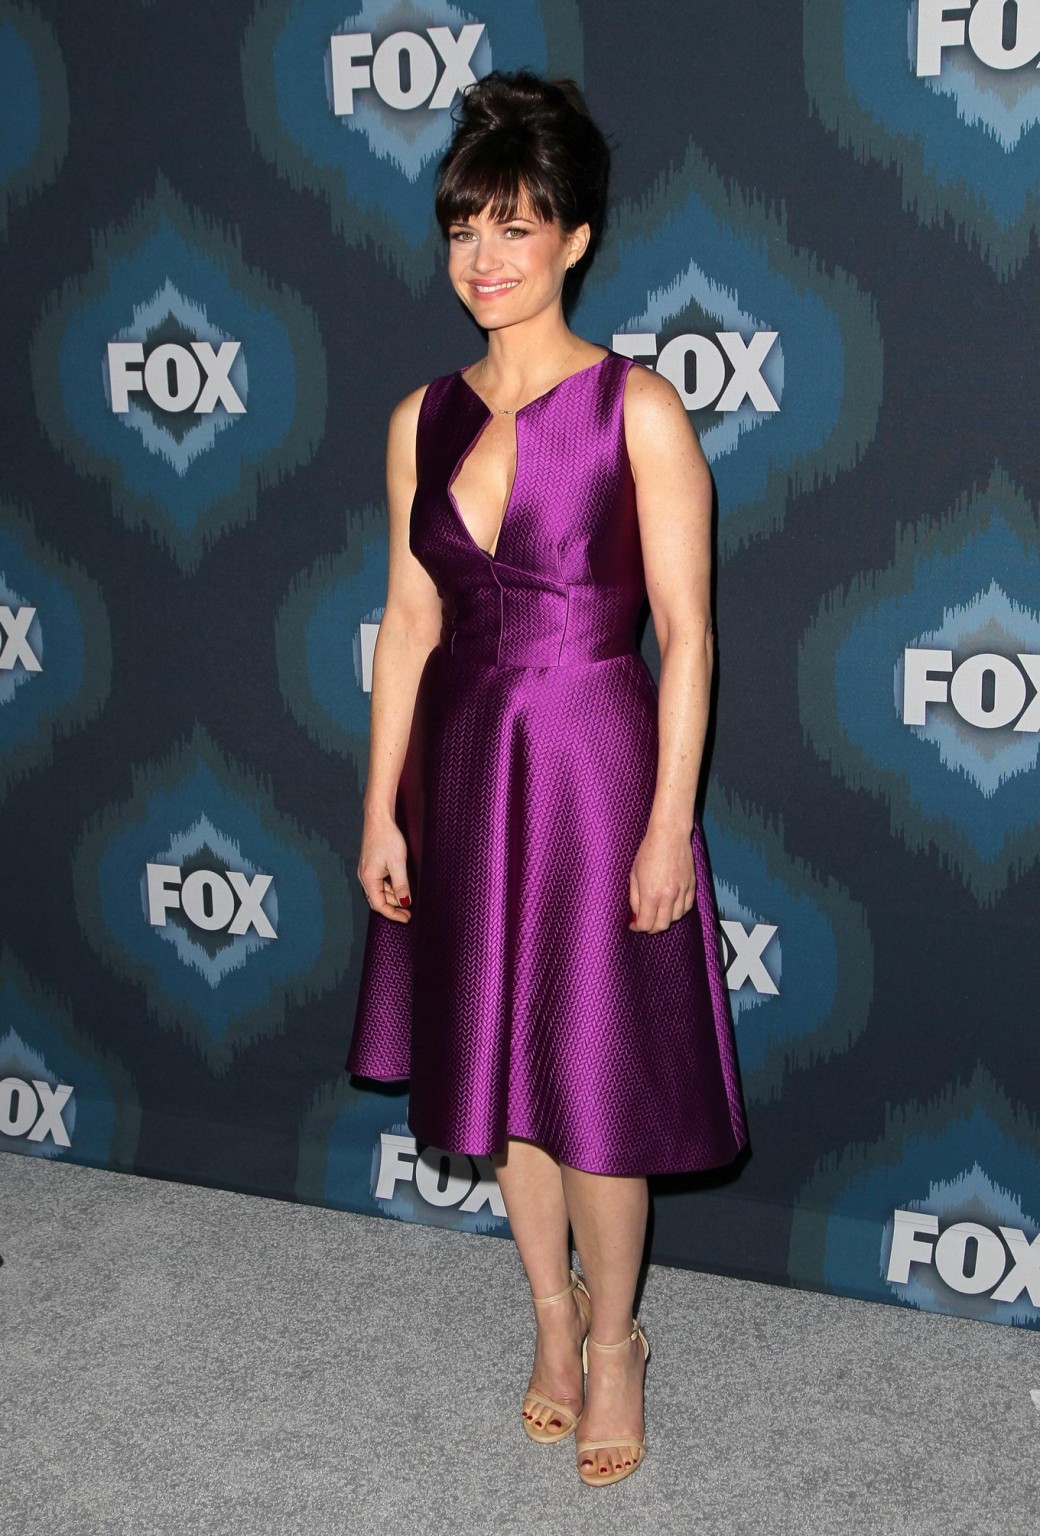 Carla Gugino shows off her big boobs braless in low cut purple dress at 2015 Fox #75175562